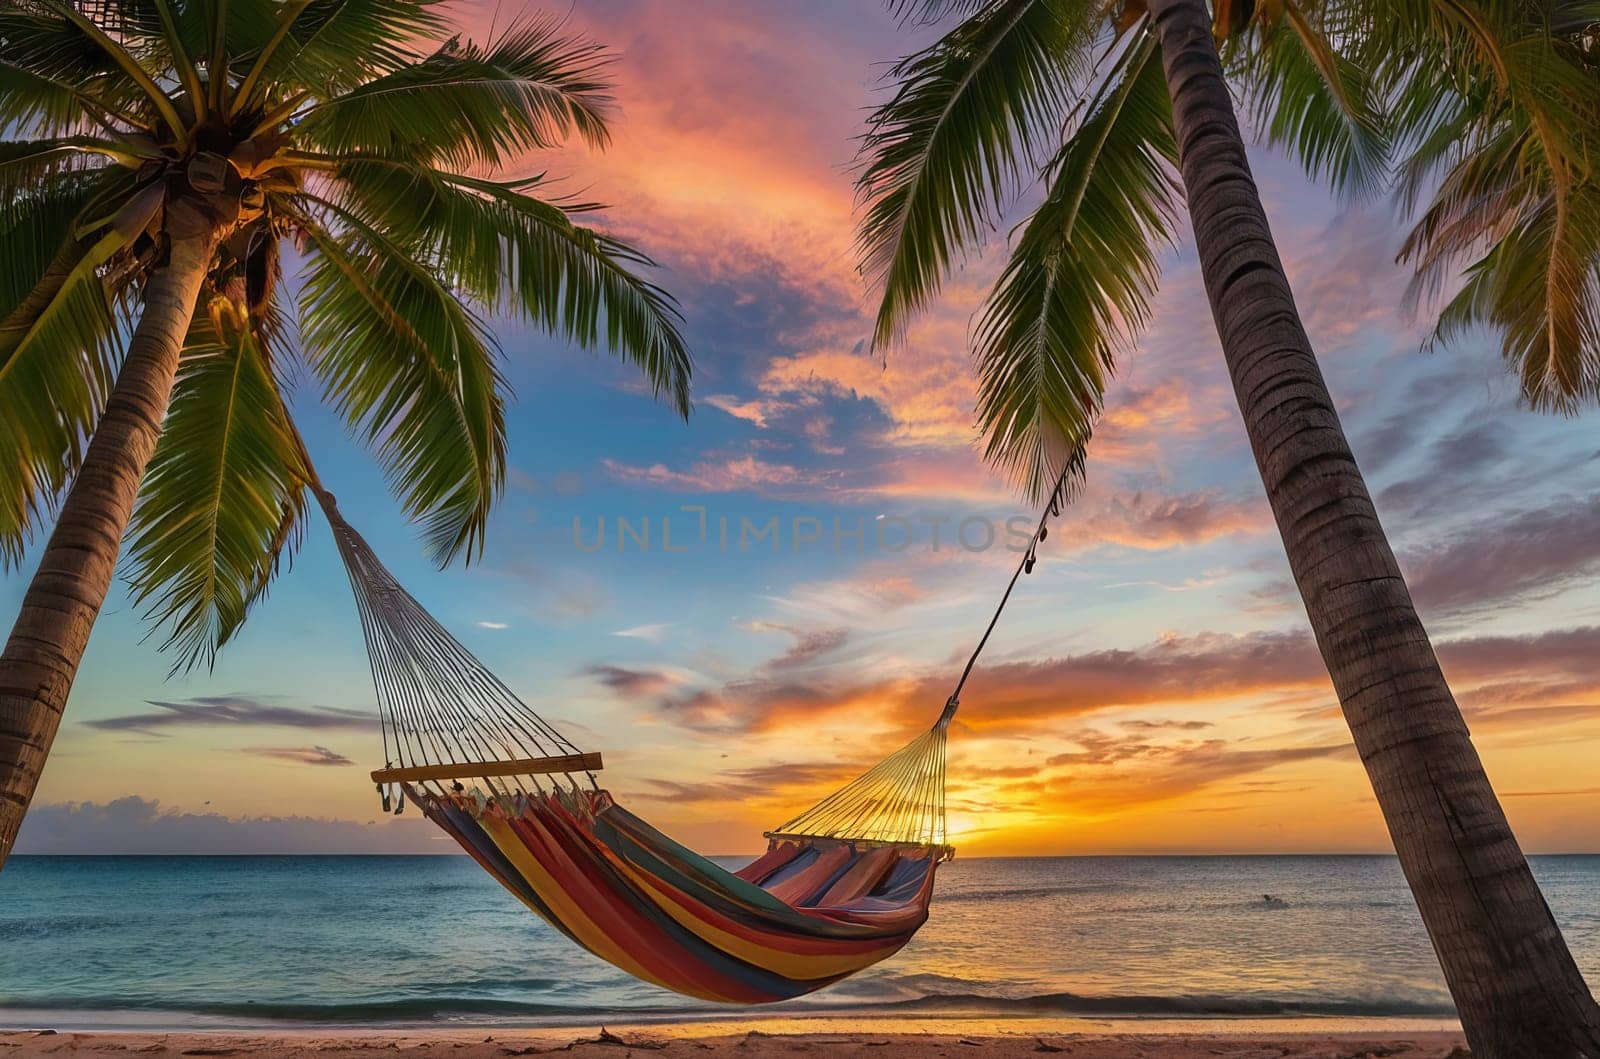 Tranquil Paradise. Hammock Swinging Between Palm Trees on Tropical Beach at Sunset.